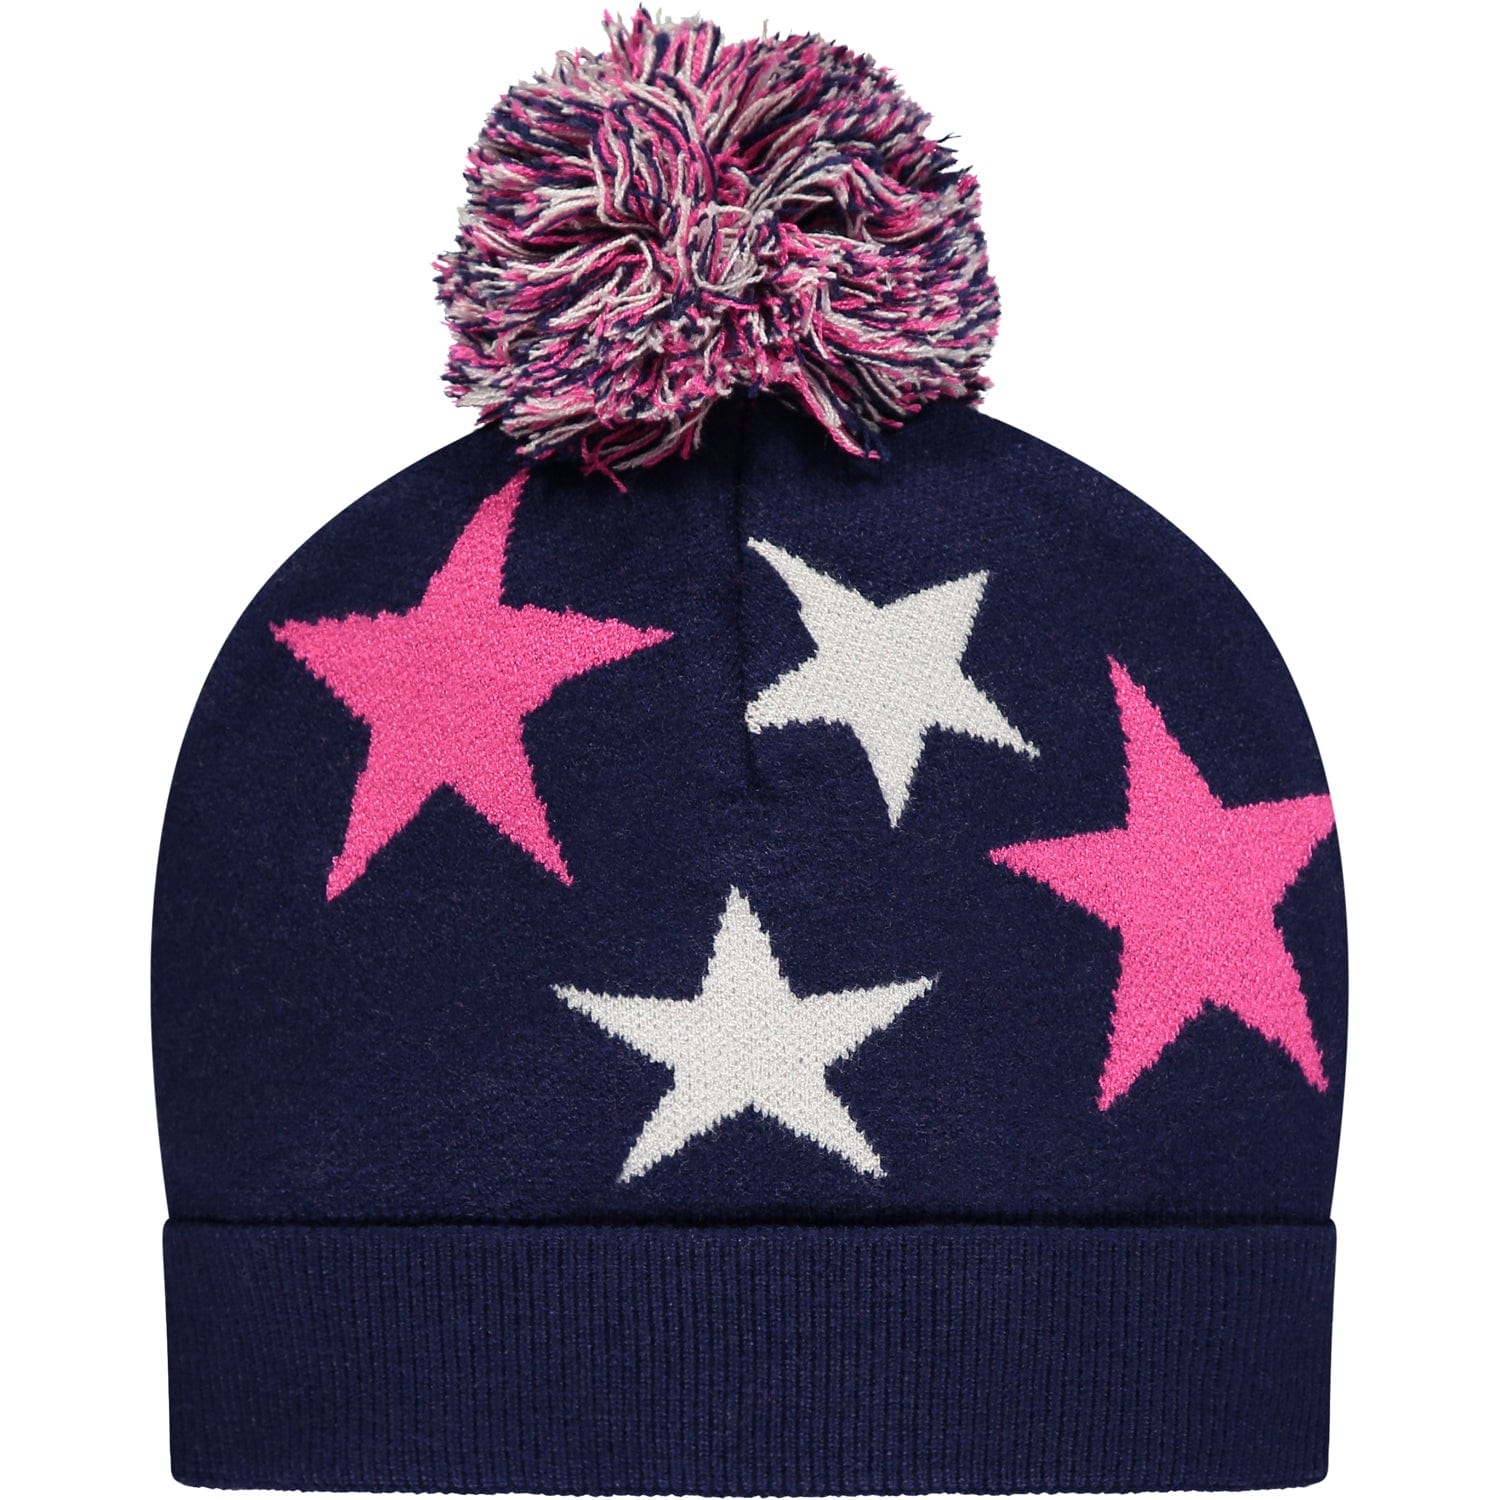 A DEE - Sabrina Knitted Star Hat - Blue Navy